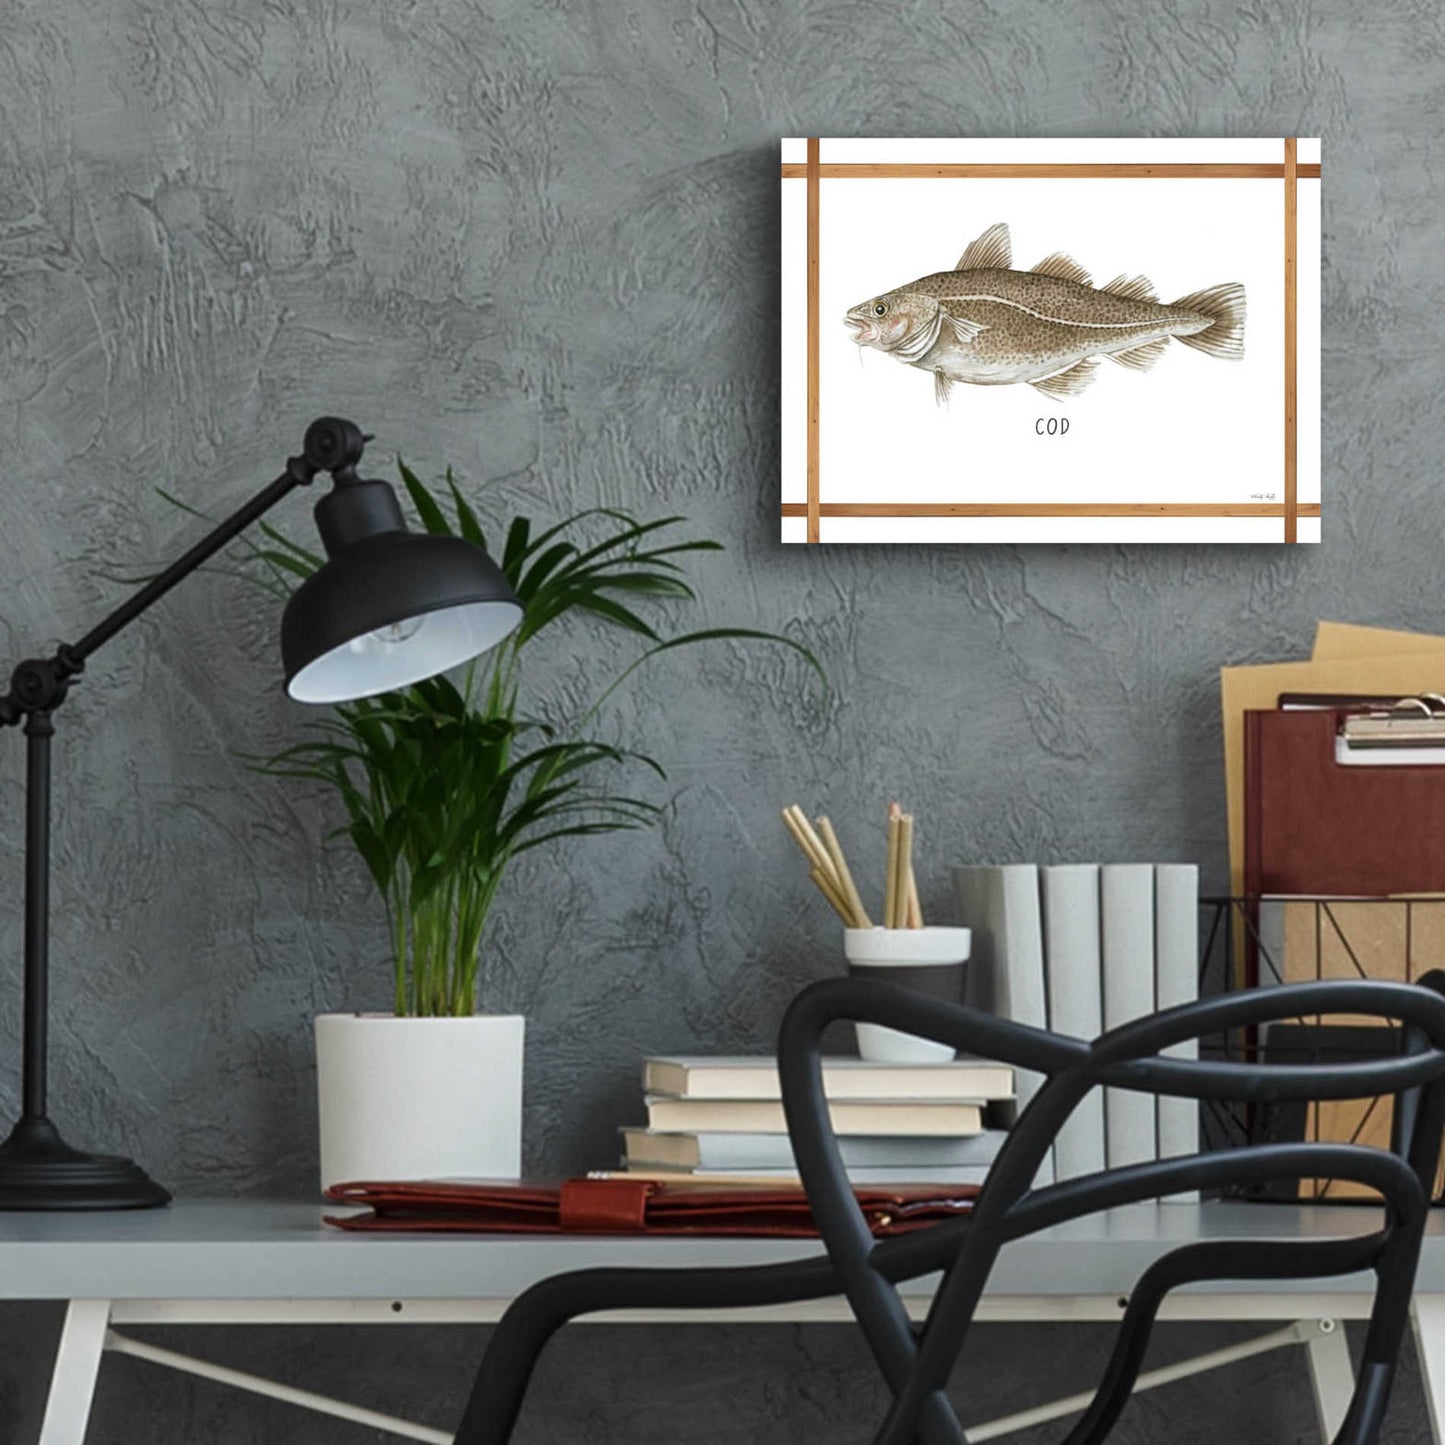 Epic Art 'Cod on White' by Cindy Jacobs, Acrylic Glass Wall Art,16x12